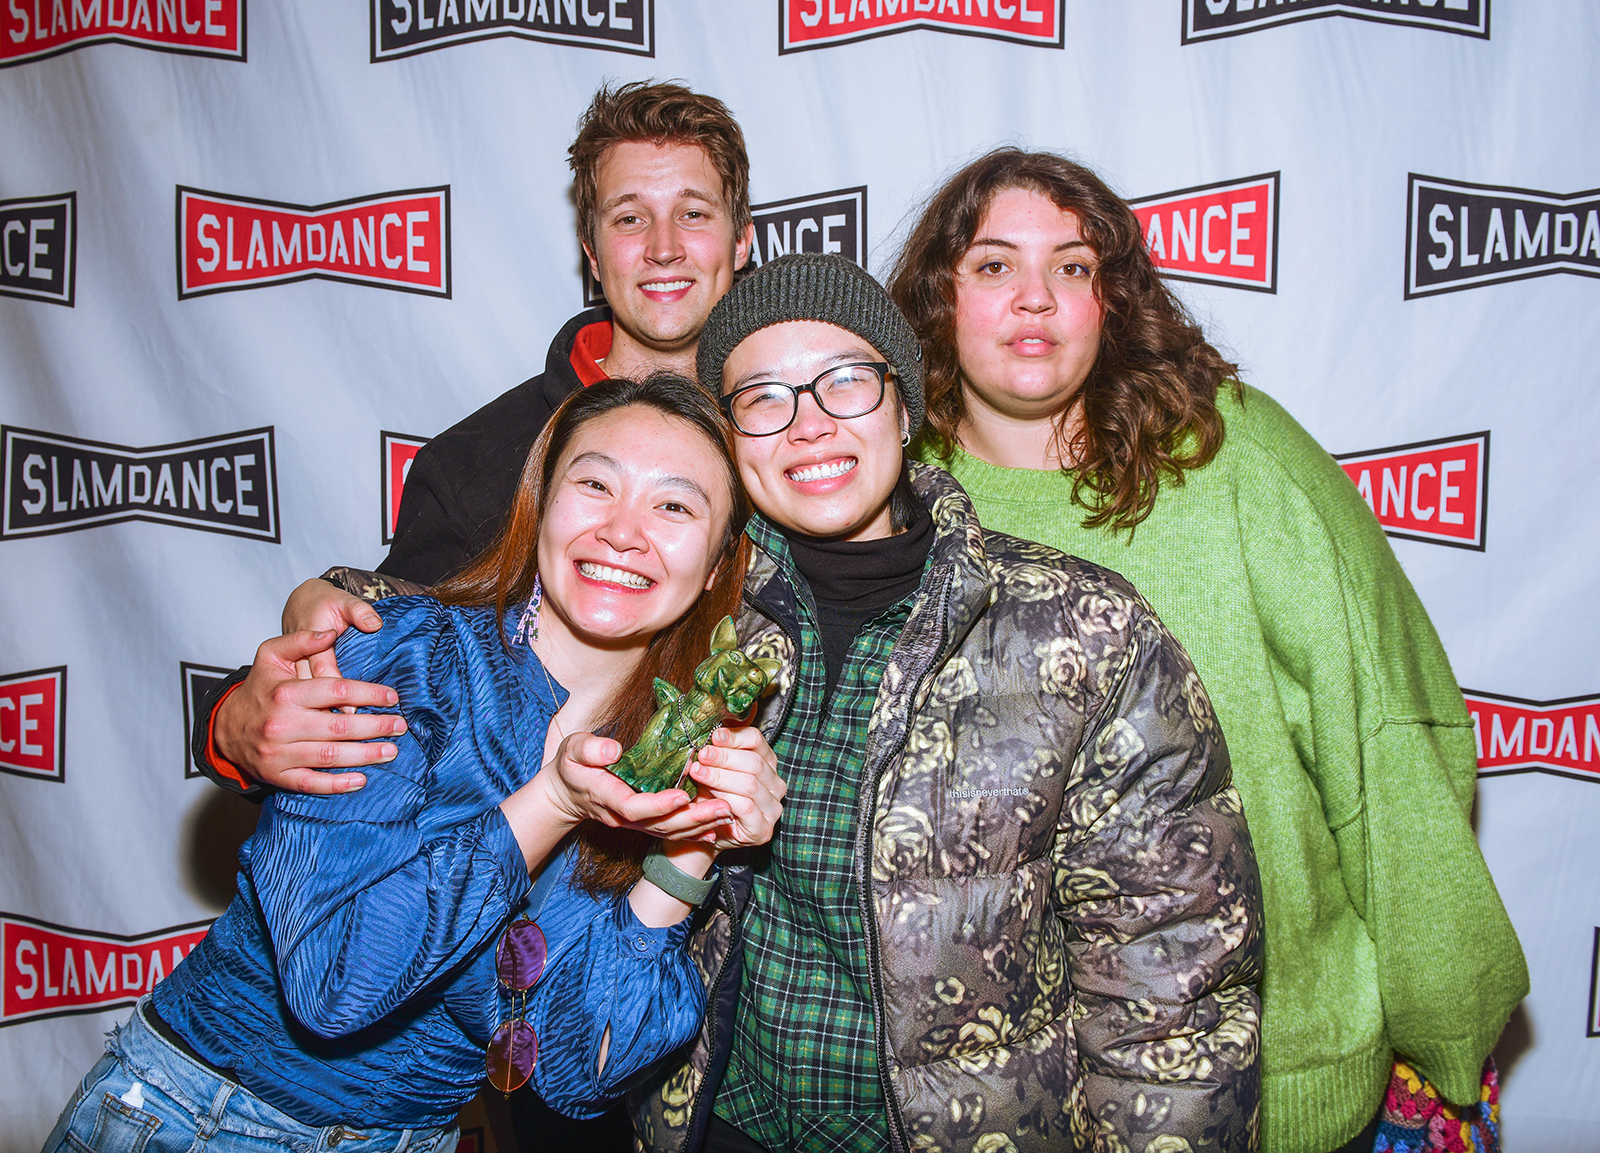 Four young people smiling and holding a statue award in front of a step and repeat that says 'Slamdance'